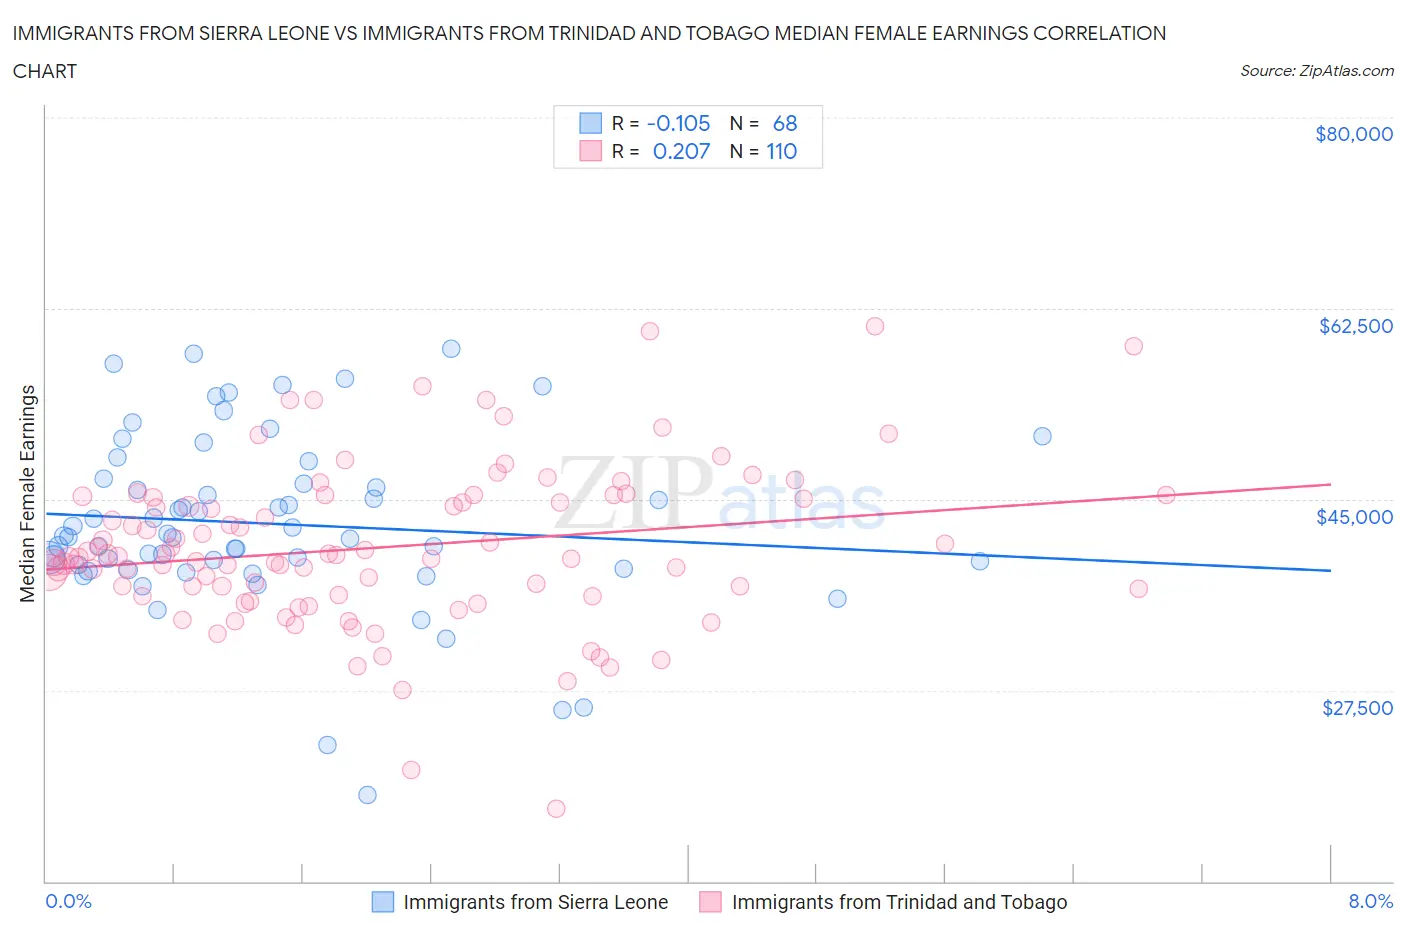 Immigrants from Sierra Leone vs Immigrants from Trinidad and Tobago Median Female Earnings